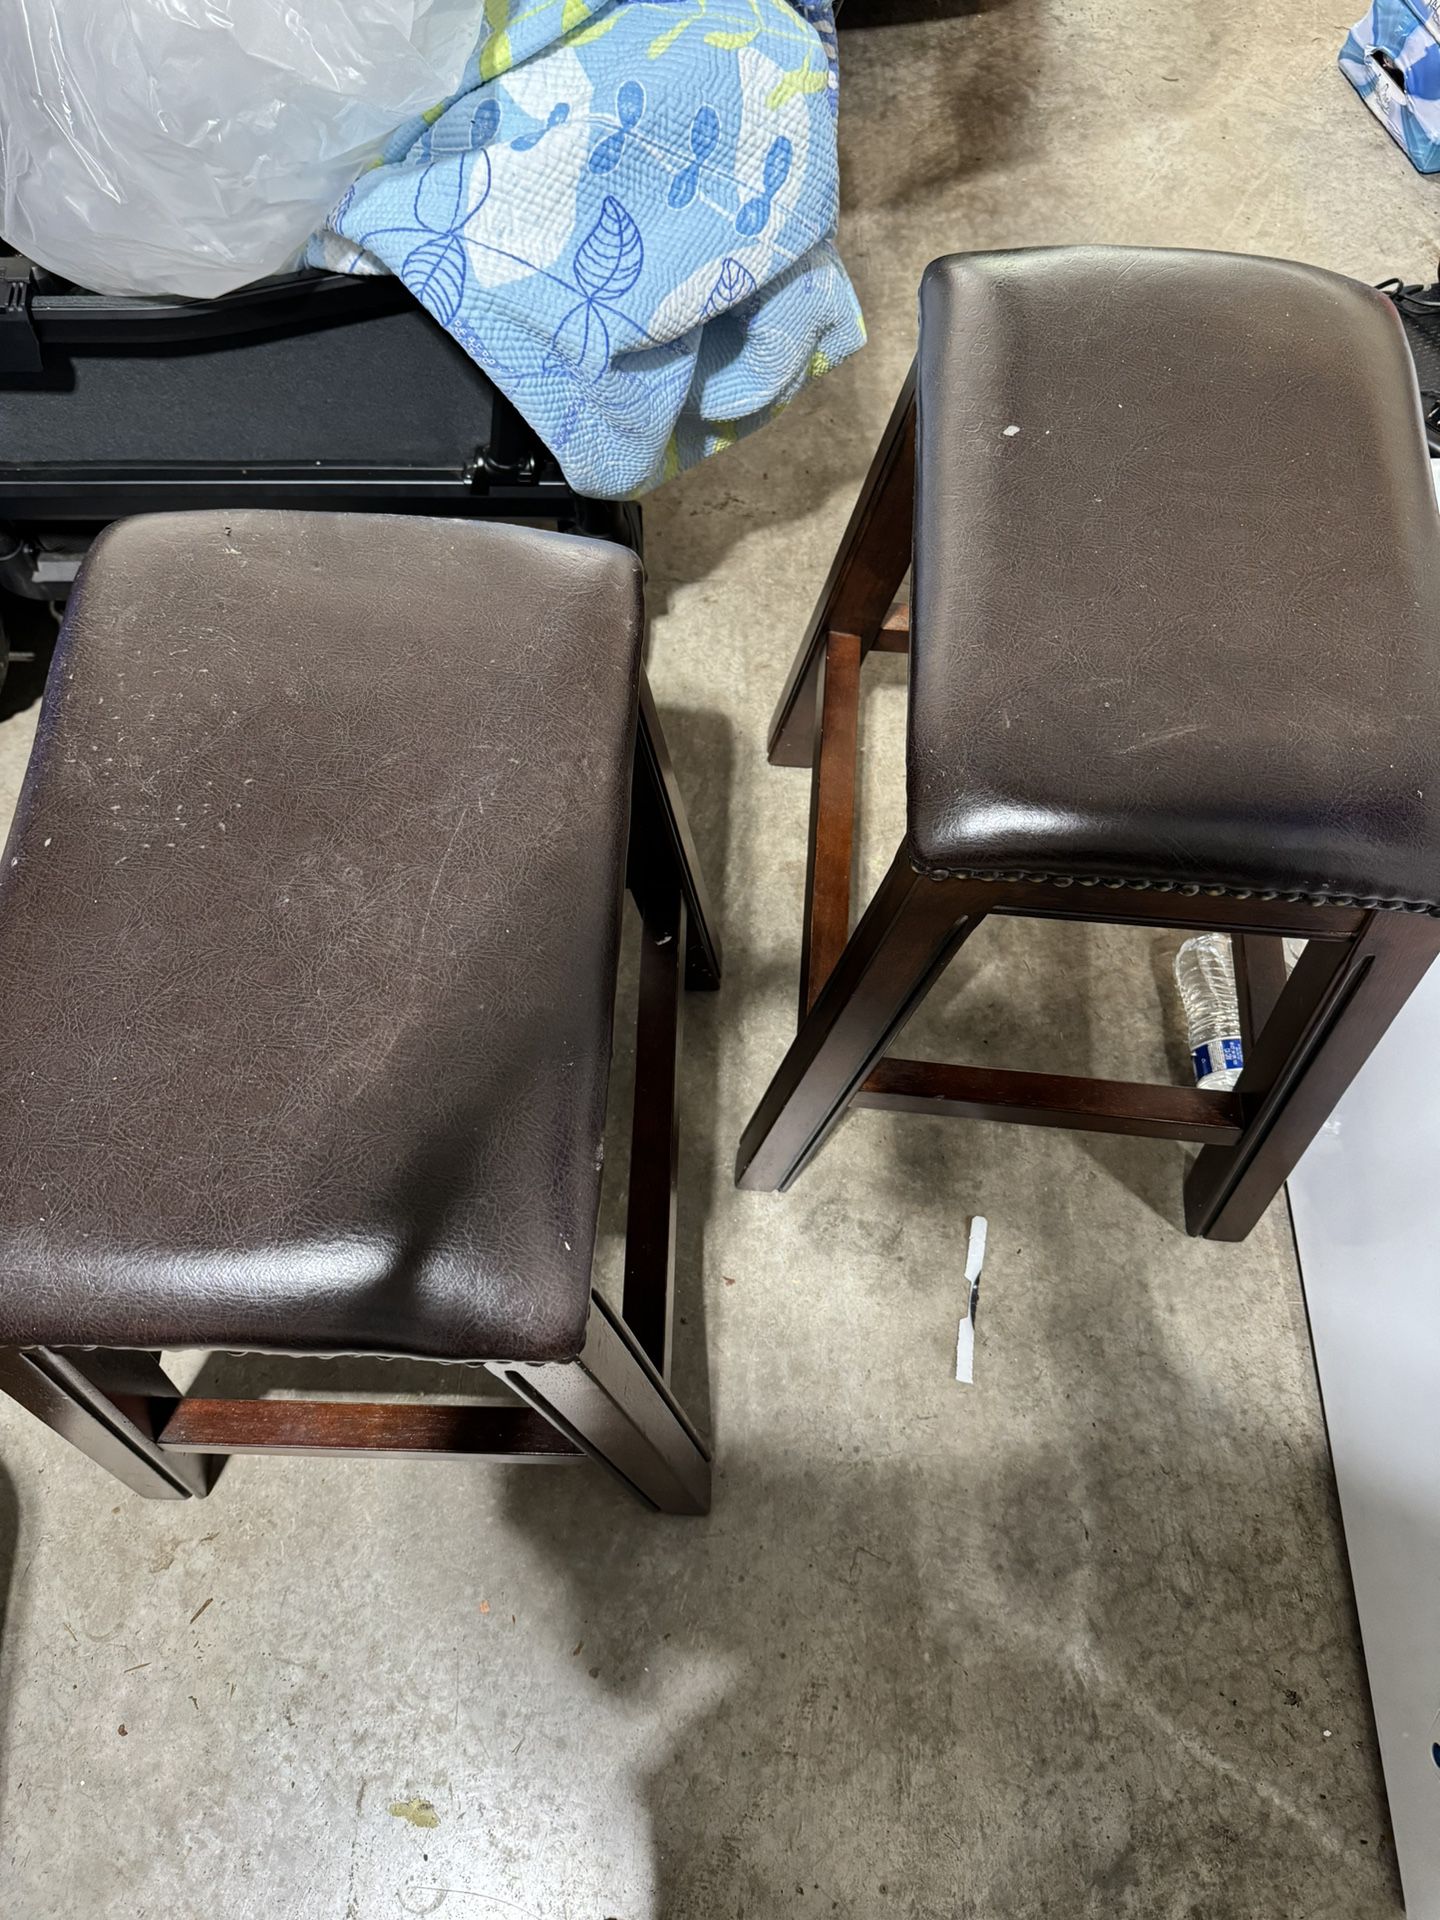 Counter Height Bar Stool Chairs 